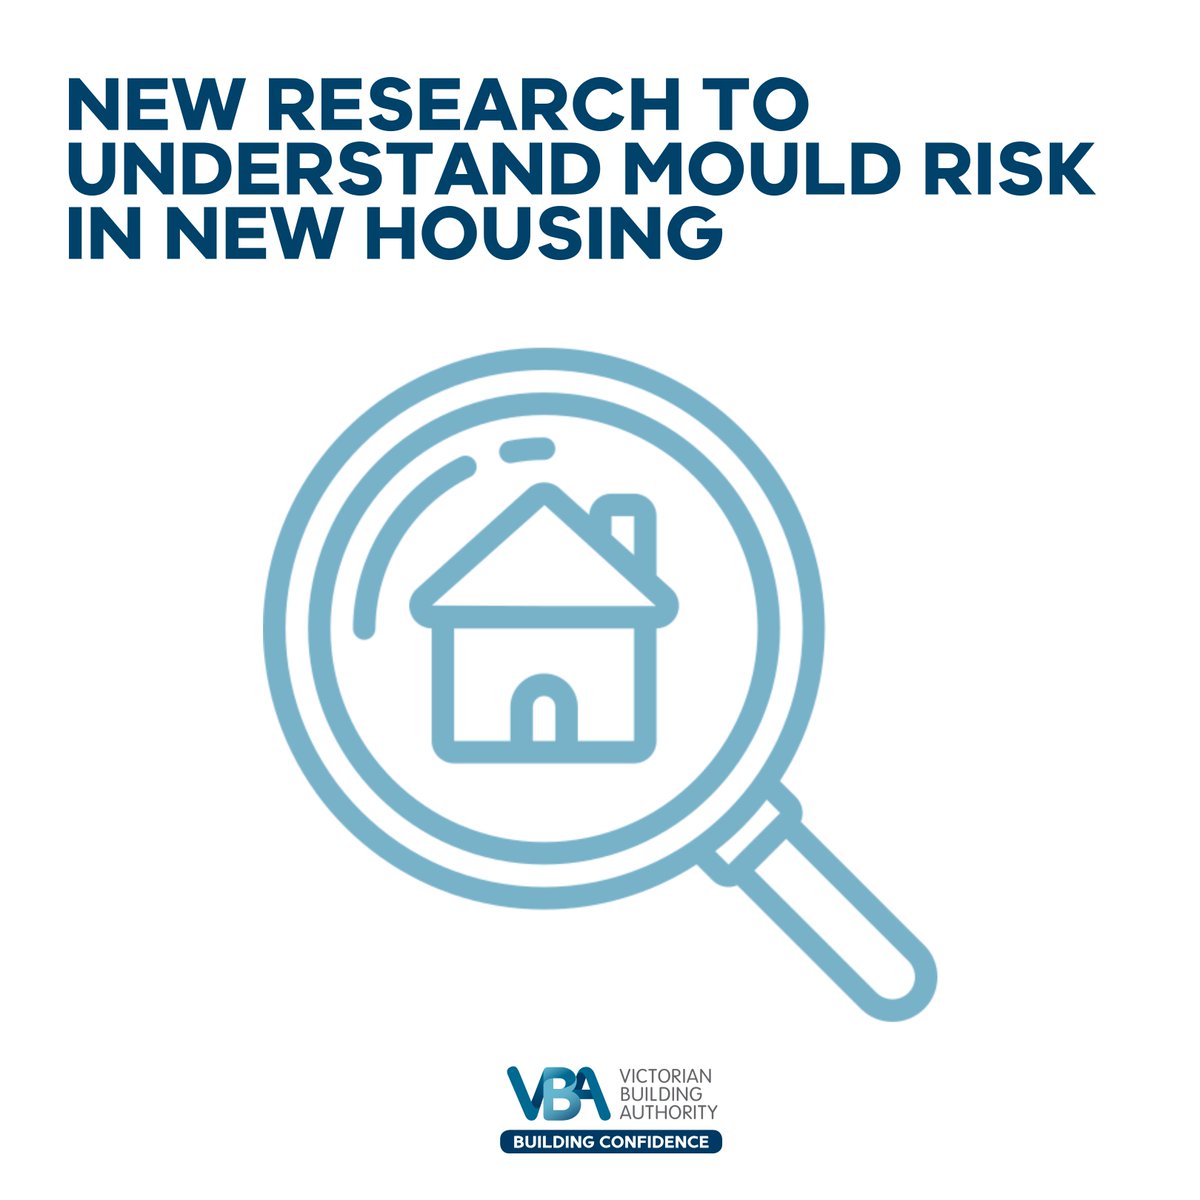 The VBA is funding research to help minimise the risk of mould growth in new energy efficient buildings. This research is a collaboration between the VBA, @CSIRO, @mbavic, @UTAS_, Forest and Wood Products Australia and @Fraunhofer_IBP. Learn more: go.vic.gov.au/MoCm9H